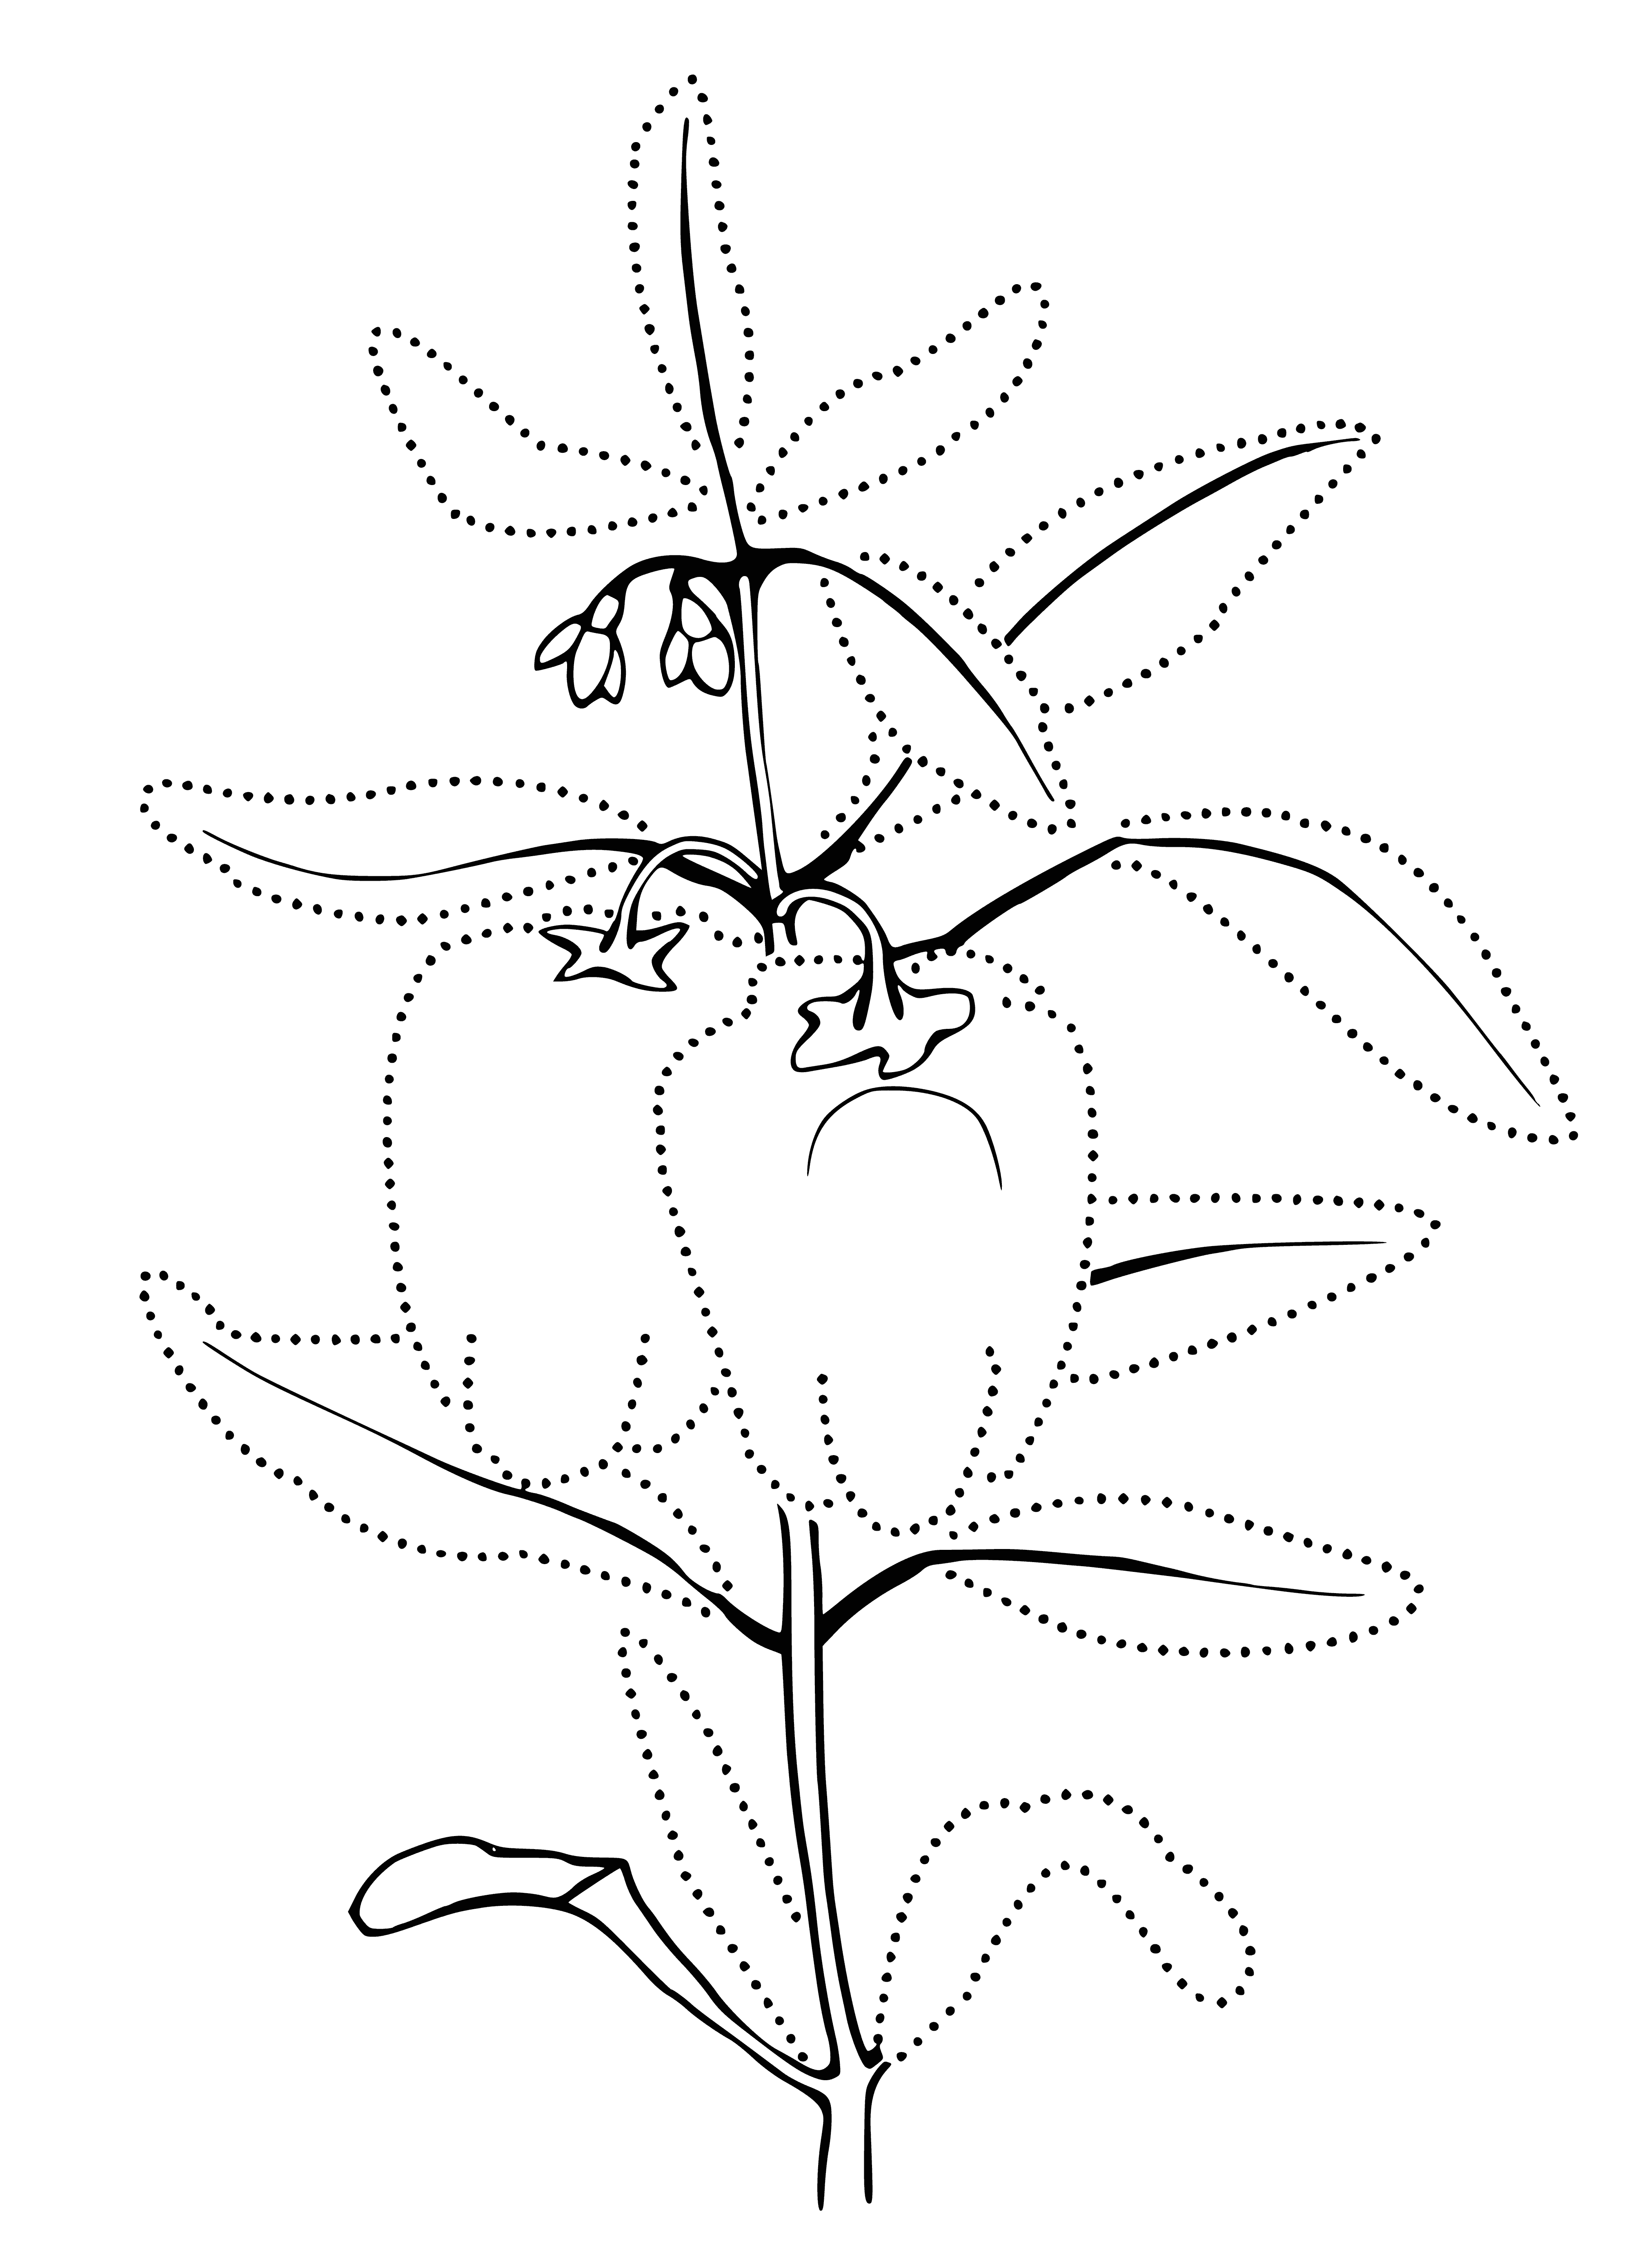 coloring page: Bell peppers are members of the nightshade family, don't produce capsaicin, and come in multiple colors.